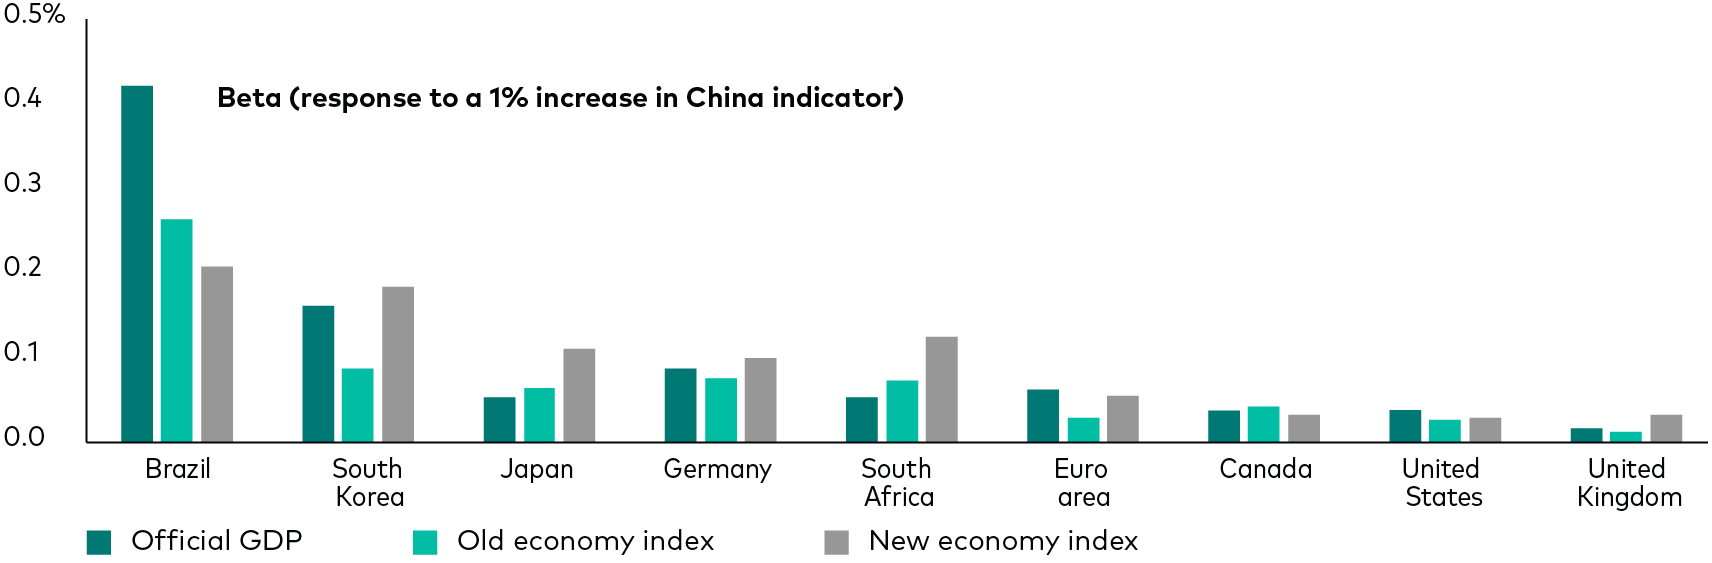 The illustration shows the degree to which various economies are affected by a 1% increase in China’s official GDP as well as in old economy and new economy indexes. The effect is greatest on Brazil, with a 0.42% response in official GDP, a 0.26% response in the old economy index, and a 0.21% response in the new economy index. The response for South Korea is 0.16% in official GDP, 0.09% in the old economy index, and 0.18% in the new economy index. The response is minimal in developed markets, including the euro area, Canada, the United States, and the United Kingdom.